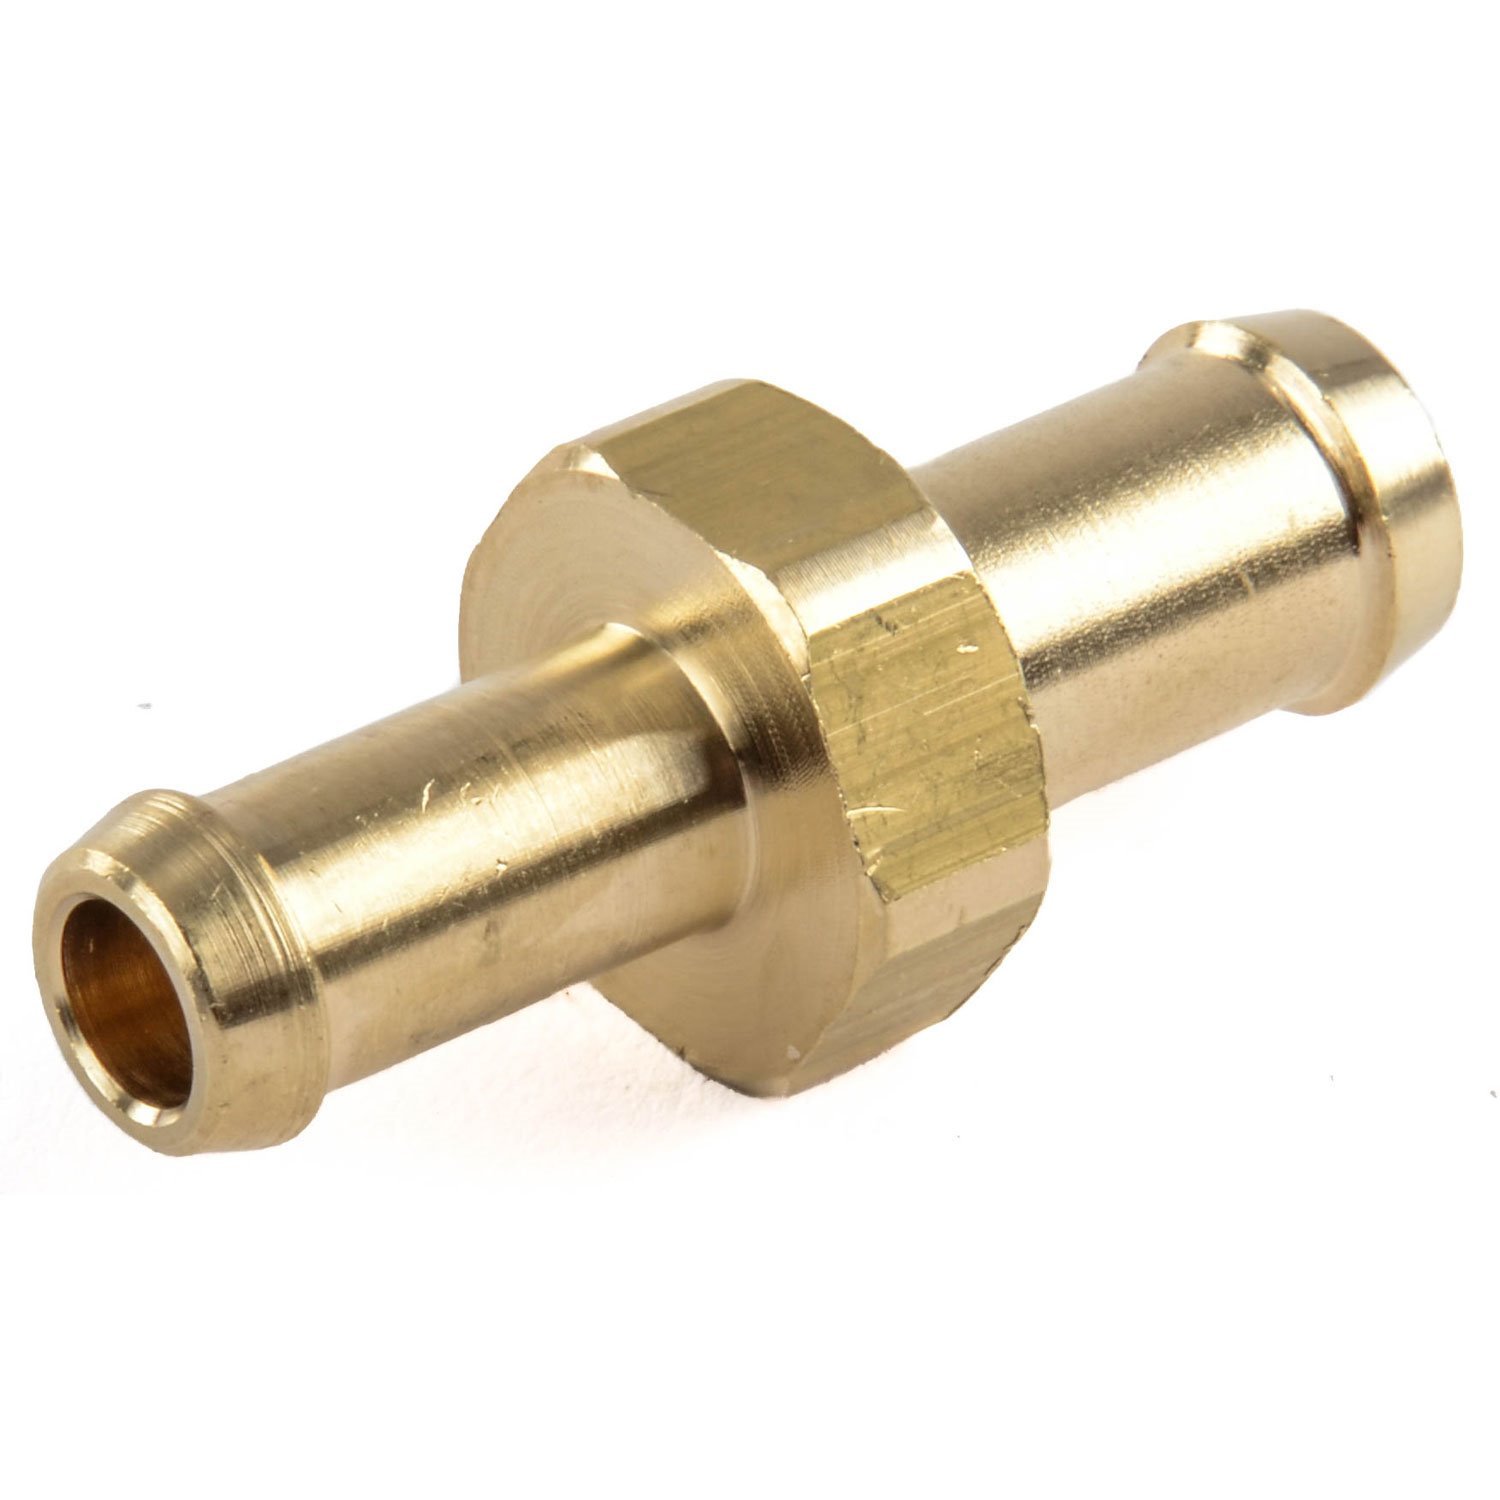 Brass Hose Adapter for 3/8 in. to 5/16 in. Hose